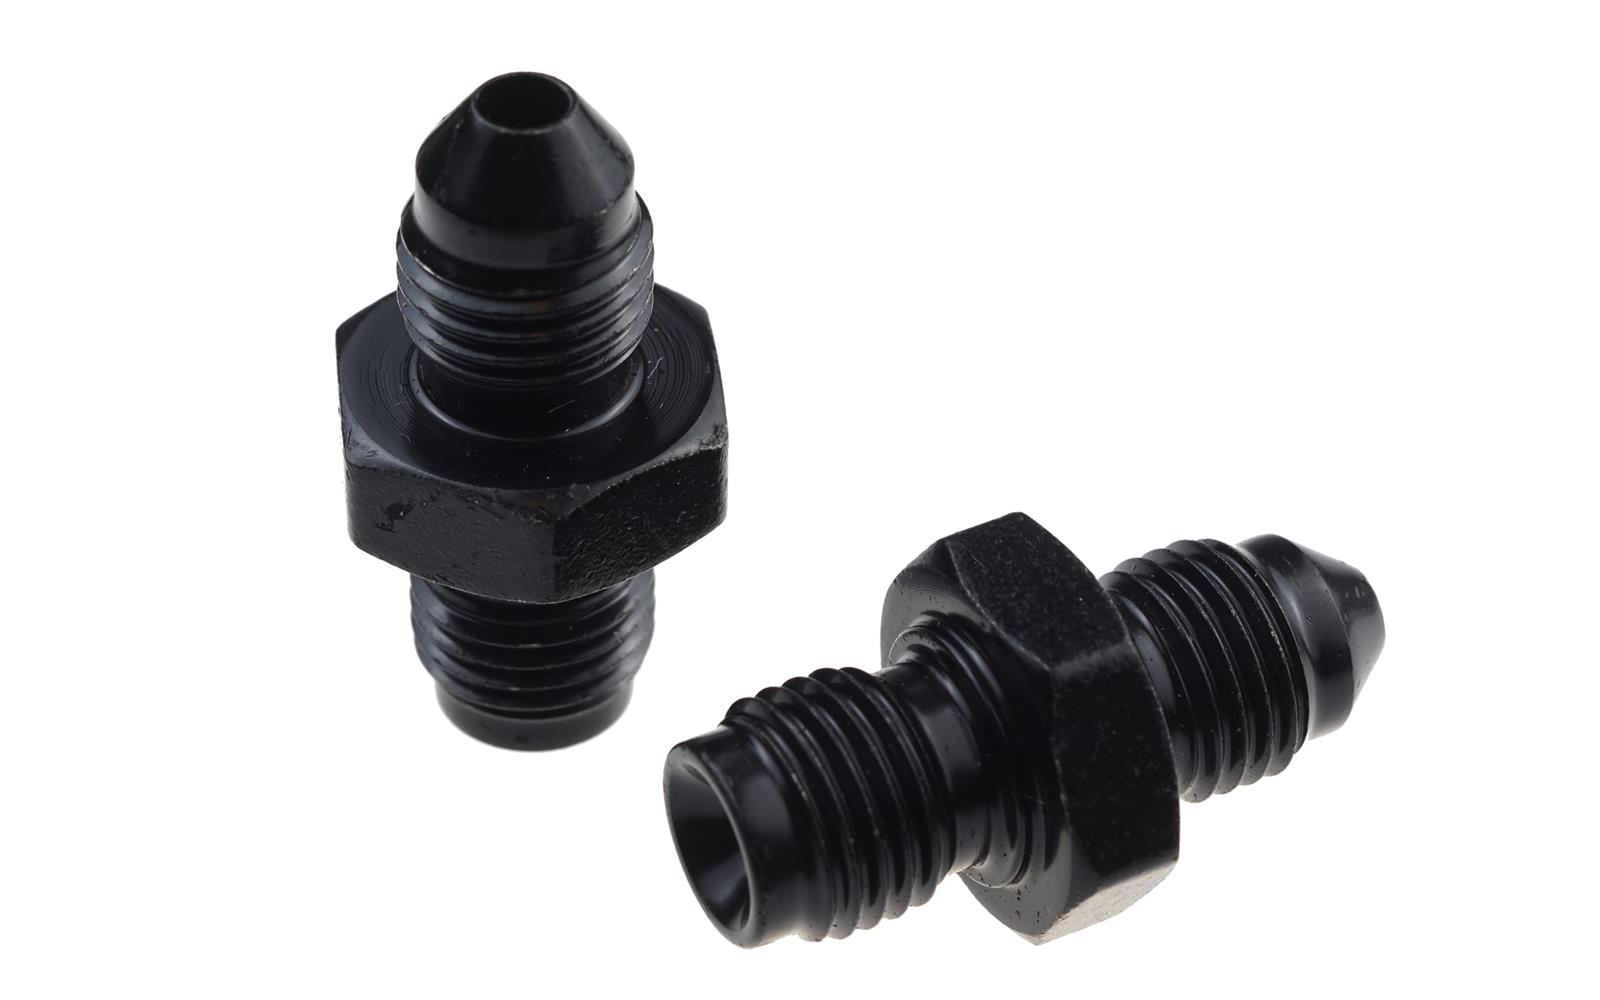 Redhorse Performance 336-03-11-2 -03 to 10mmx1.0 Male inverted flare - black -2pcs/pkg